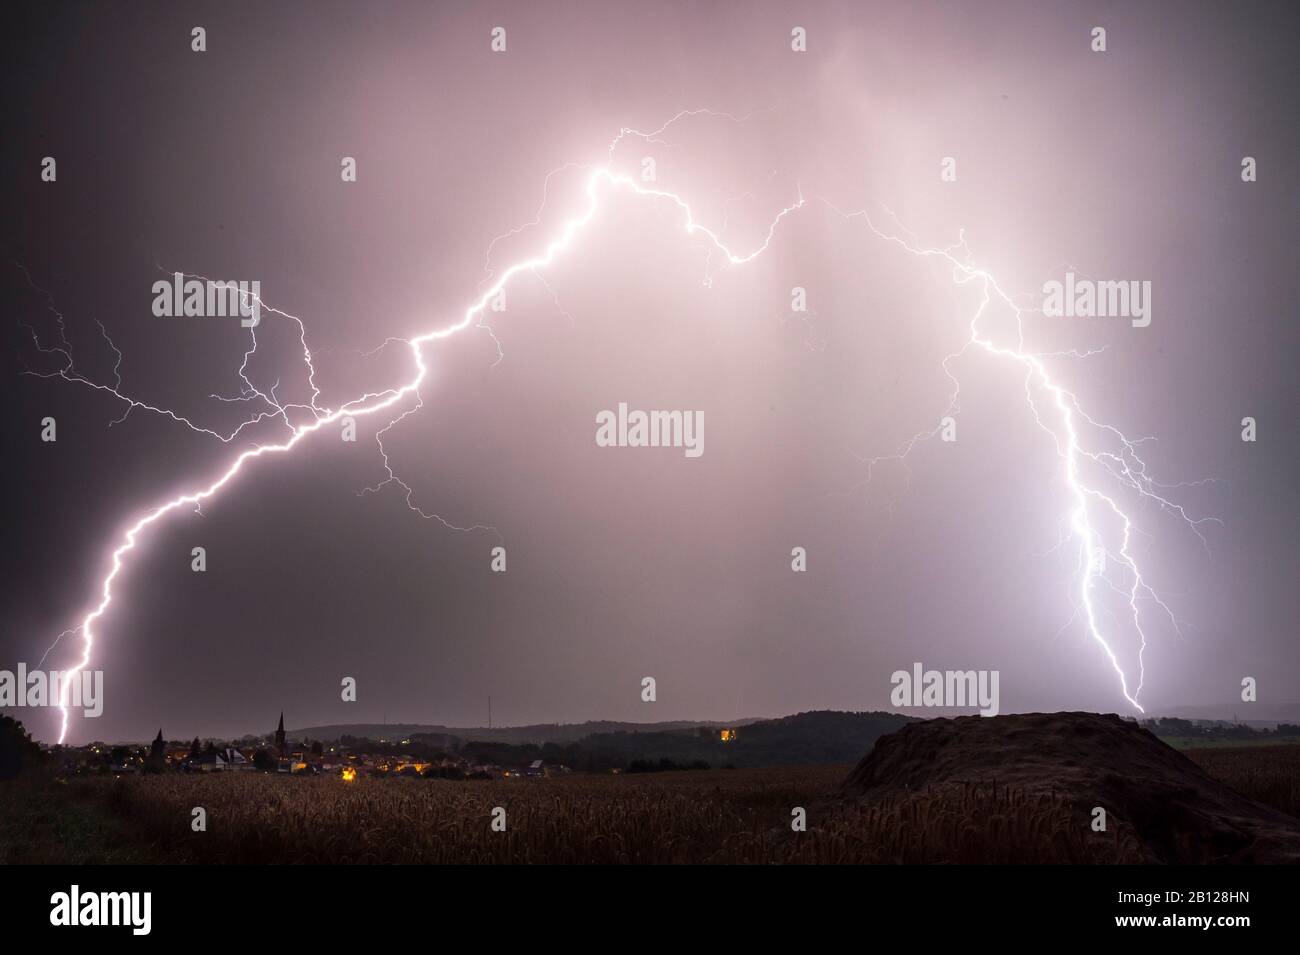 Branched lightning bolts behind the city of Grünberg, Hessen, Germany Stock Photo